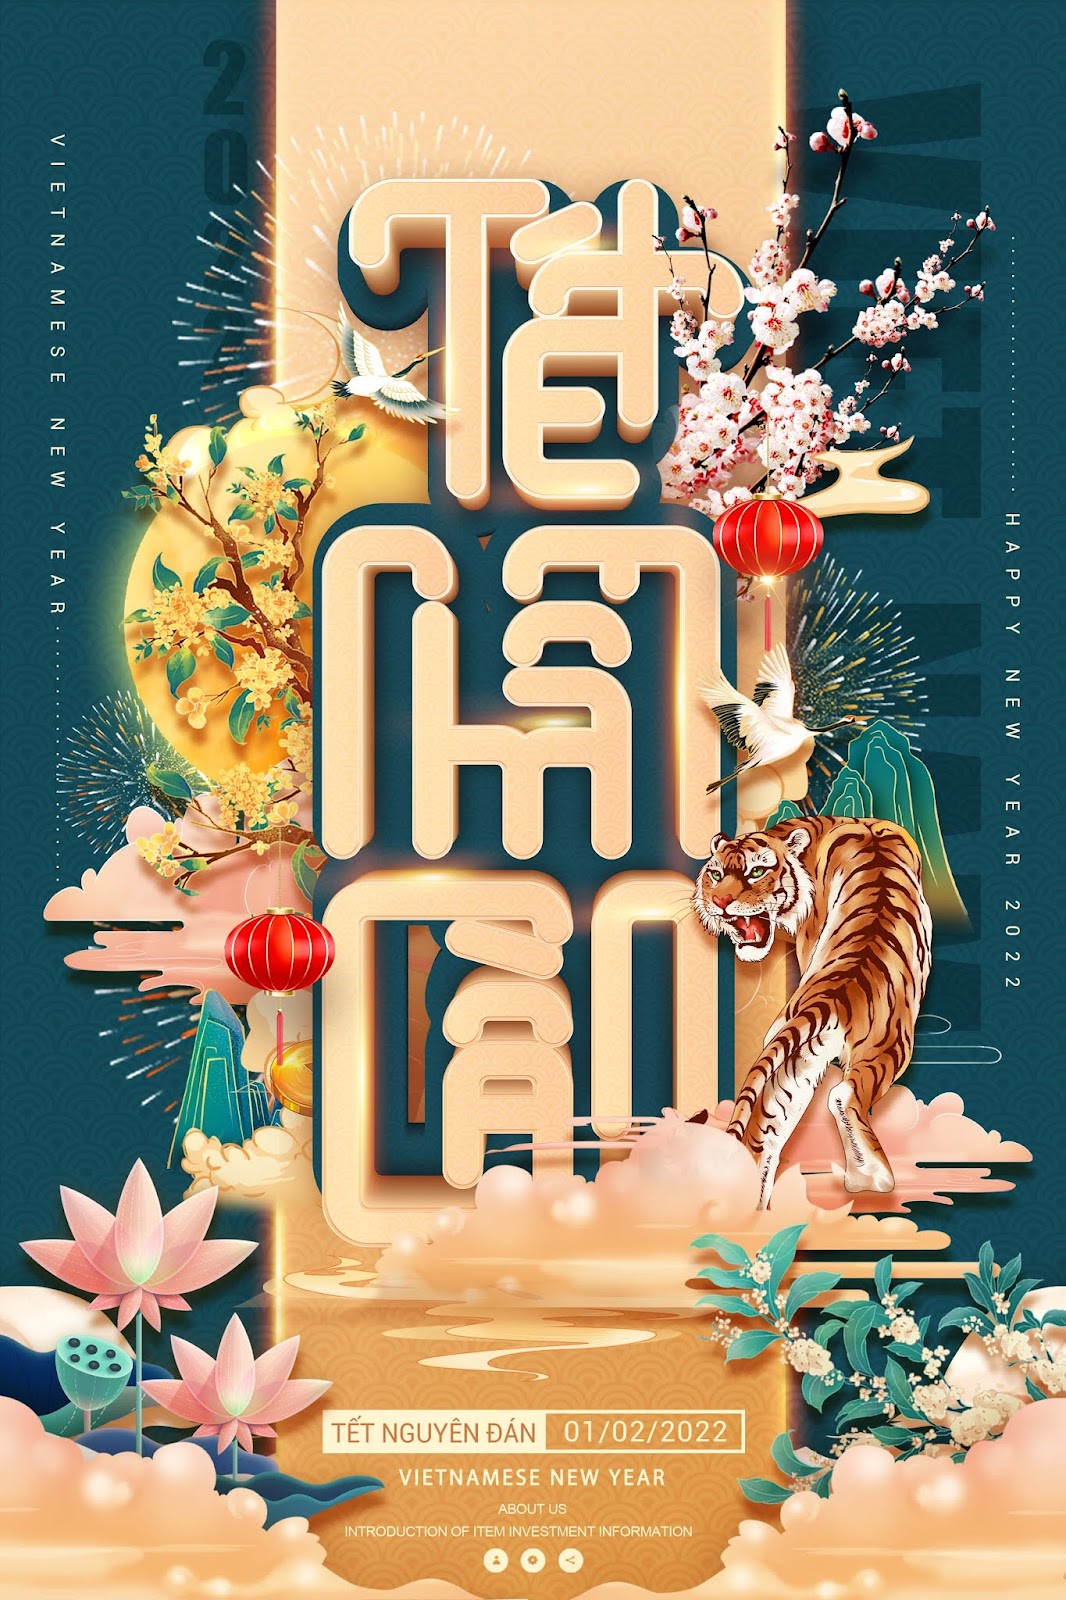 Download 3 file thiết kế poster Tết 2022 (PSD)